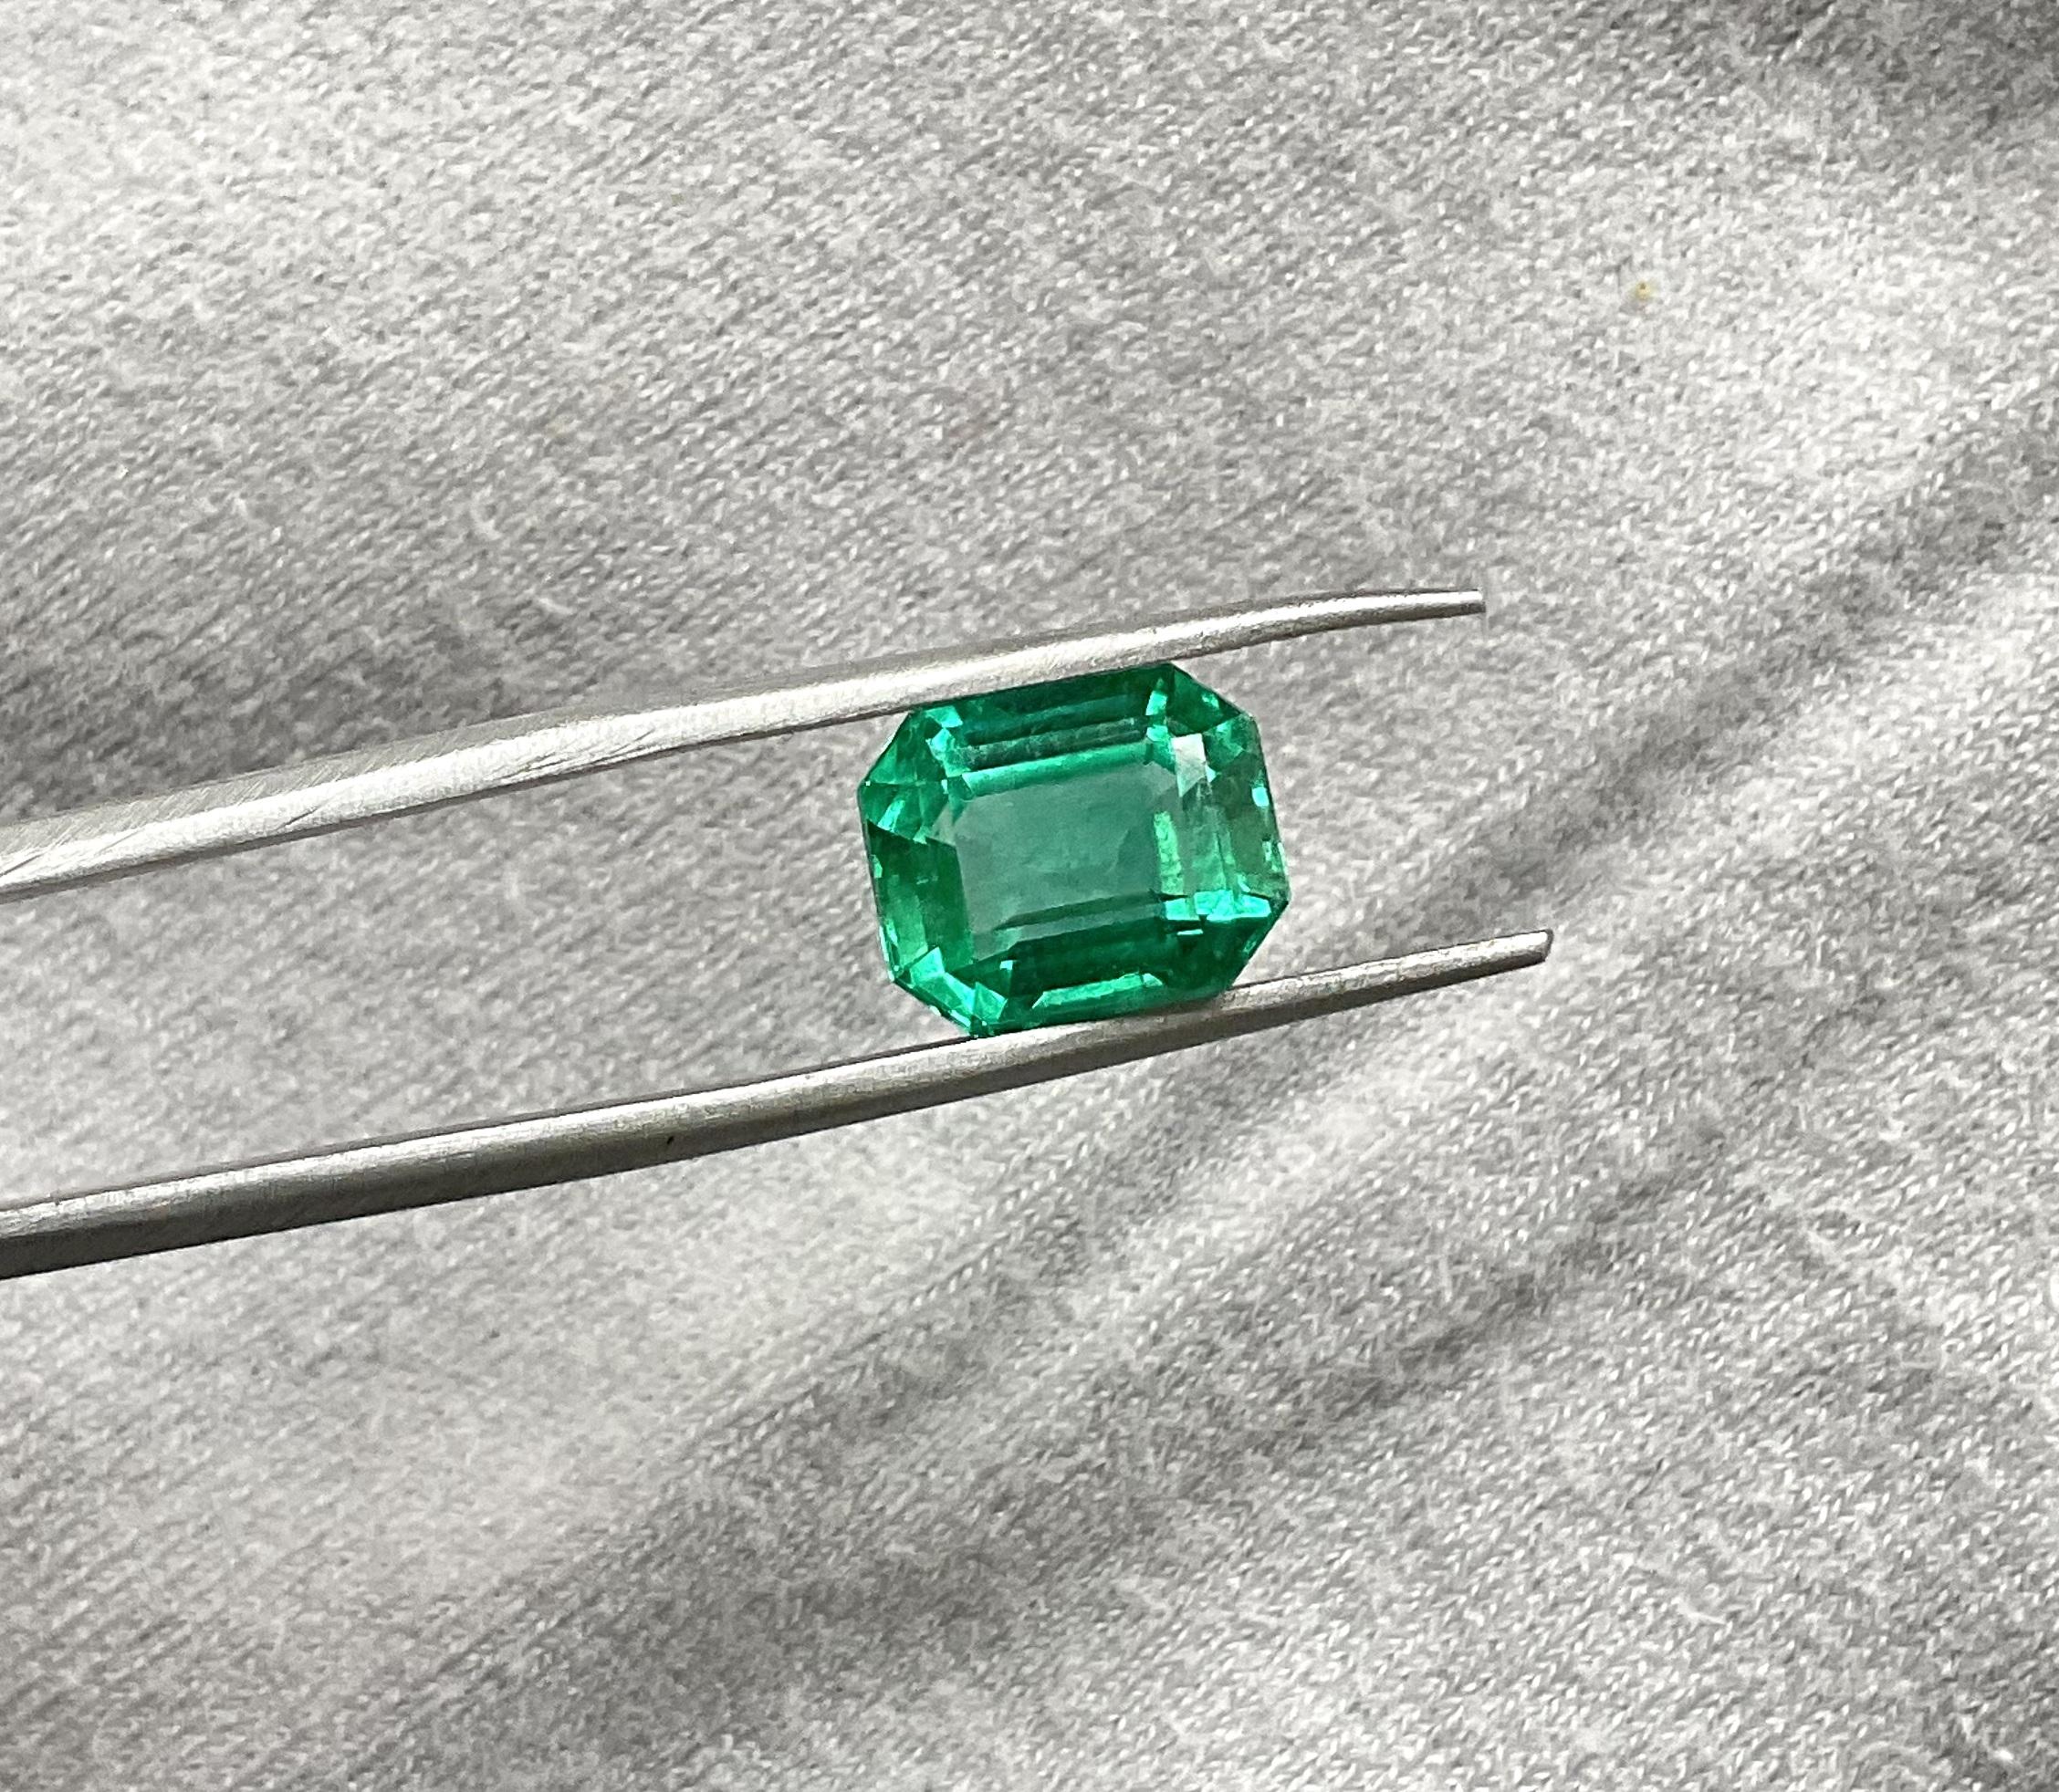 Taille octogone 4.30 Carats Zambia Emerald Octagon Cut Stone For Fine jewelry Ring Natural Gem en vente